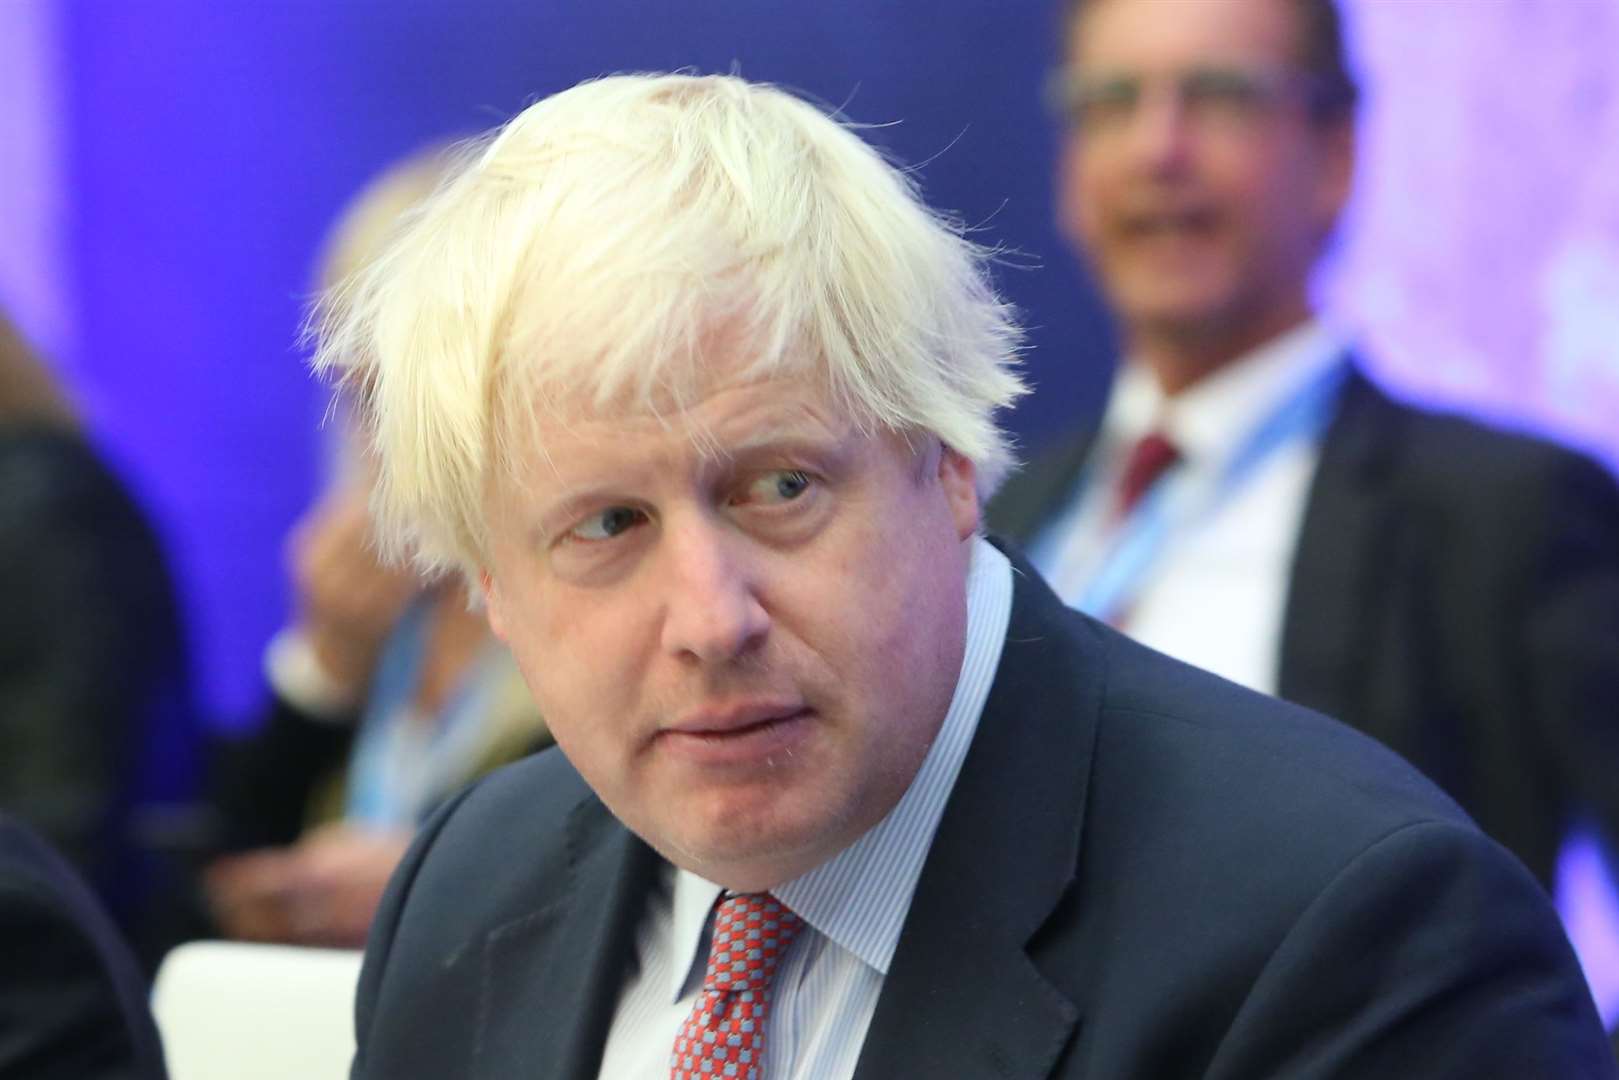 Should Boris Johnson have jetted off on holiday to a luxury villa?